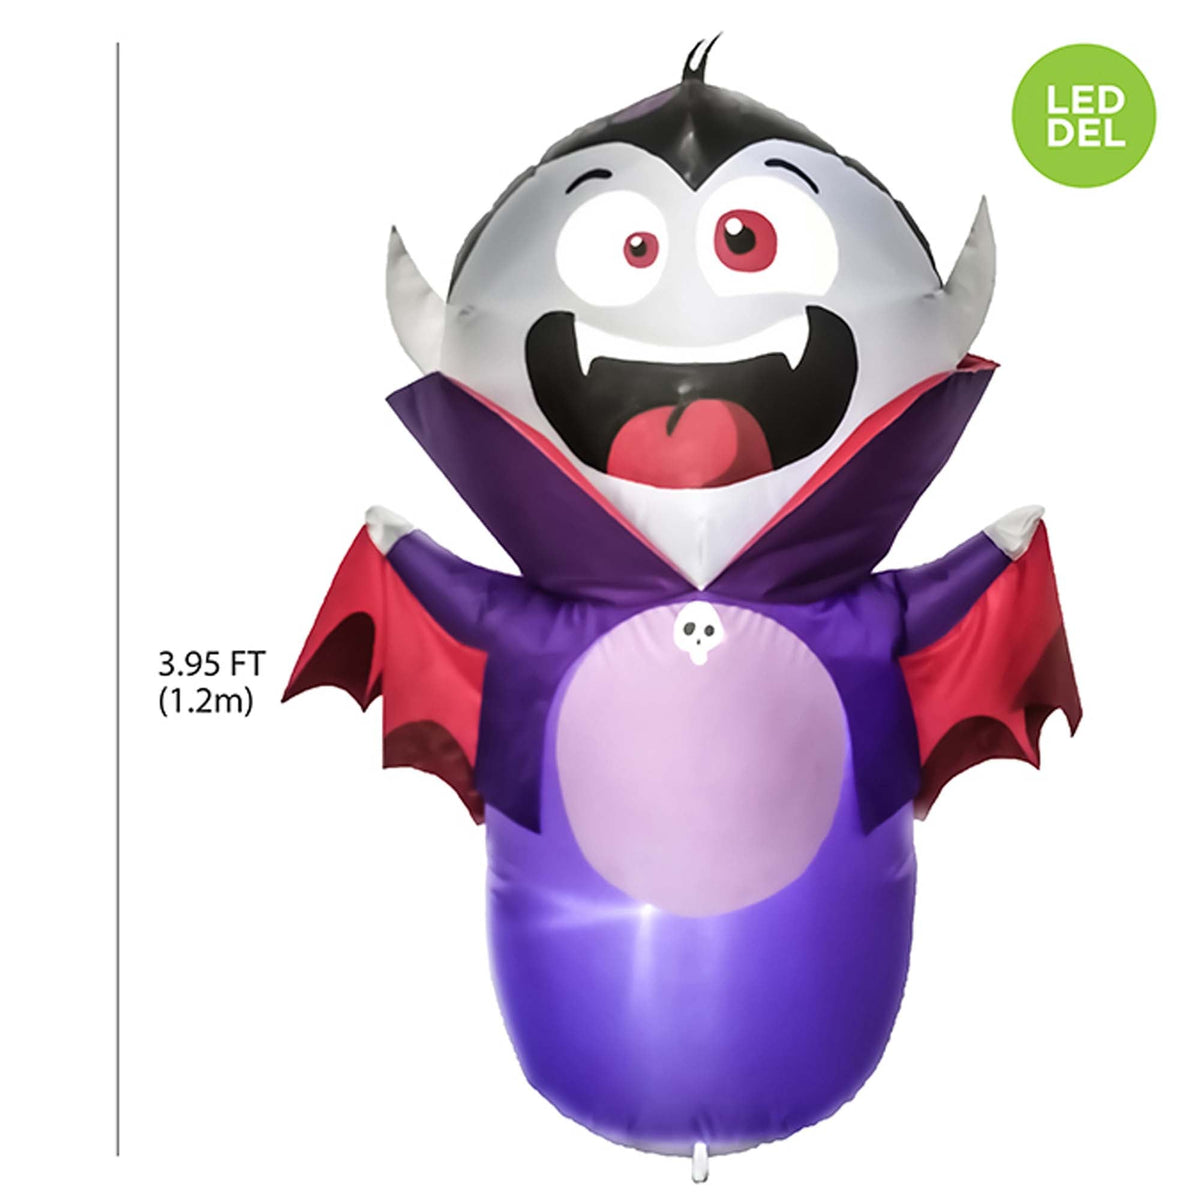 DANSON DECOR Halloween Inflatable Light-Up Vampire Decoration, 47 Inches, 1 Count